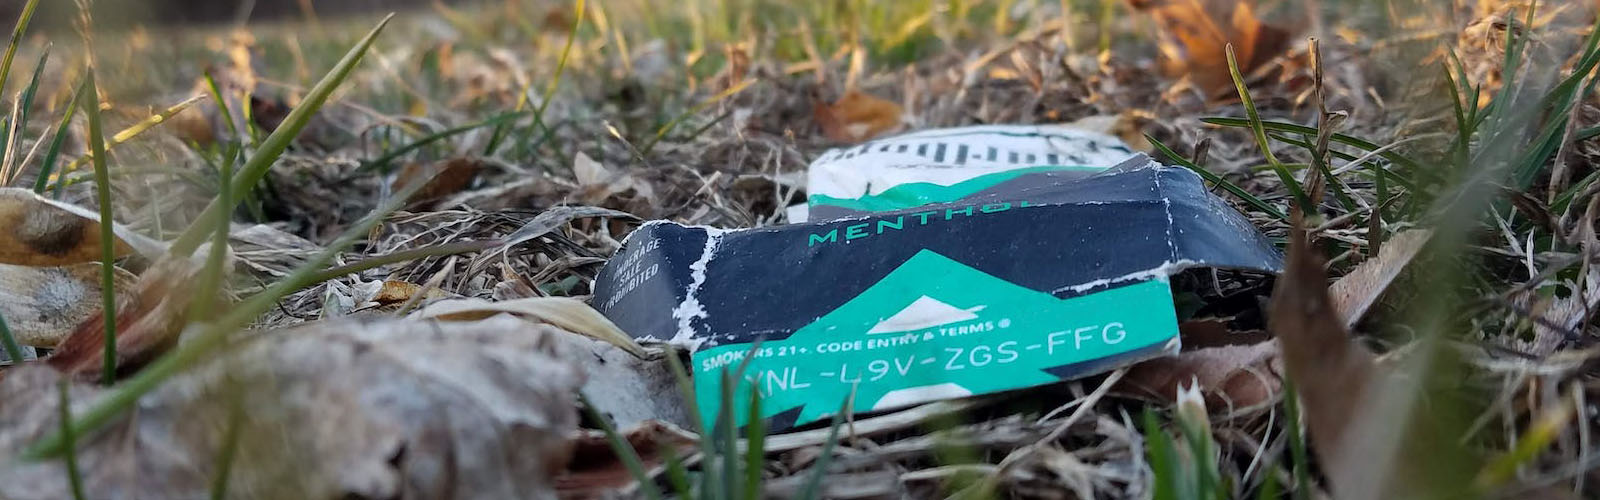 Crumpled menthol cigarette package in a field